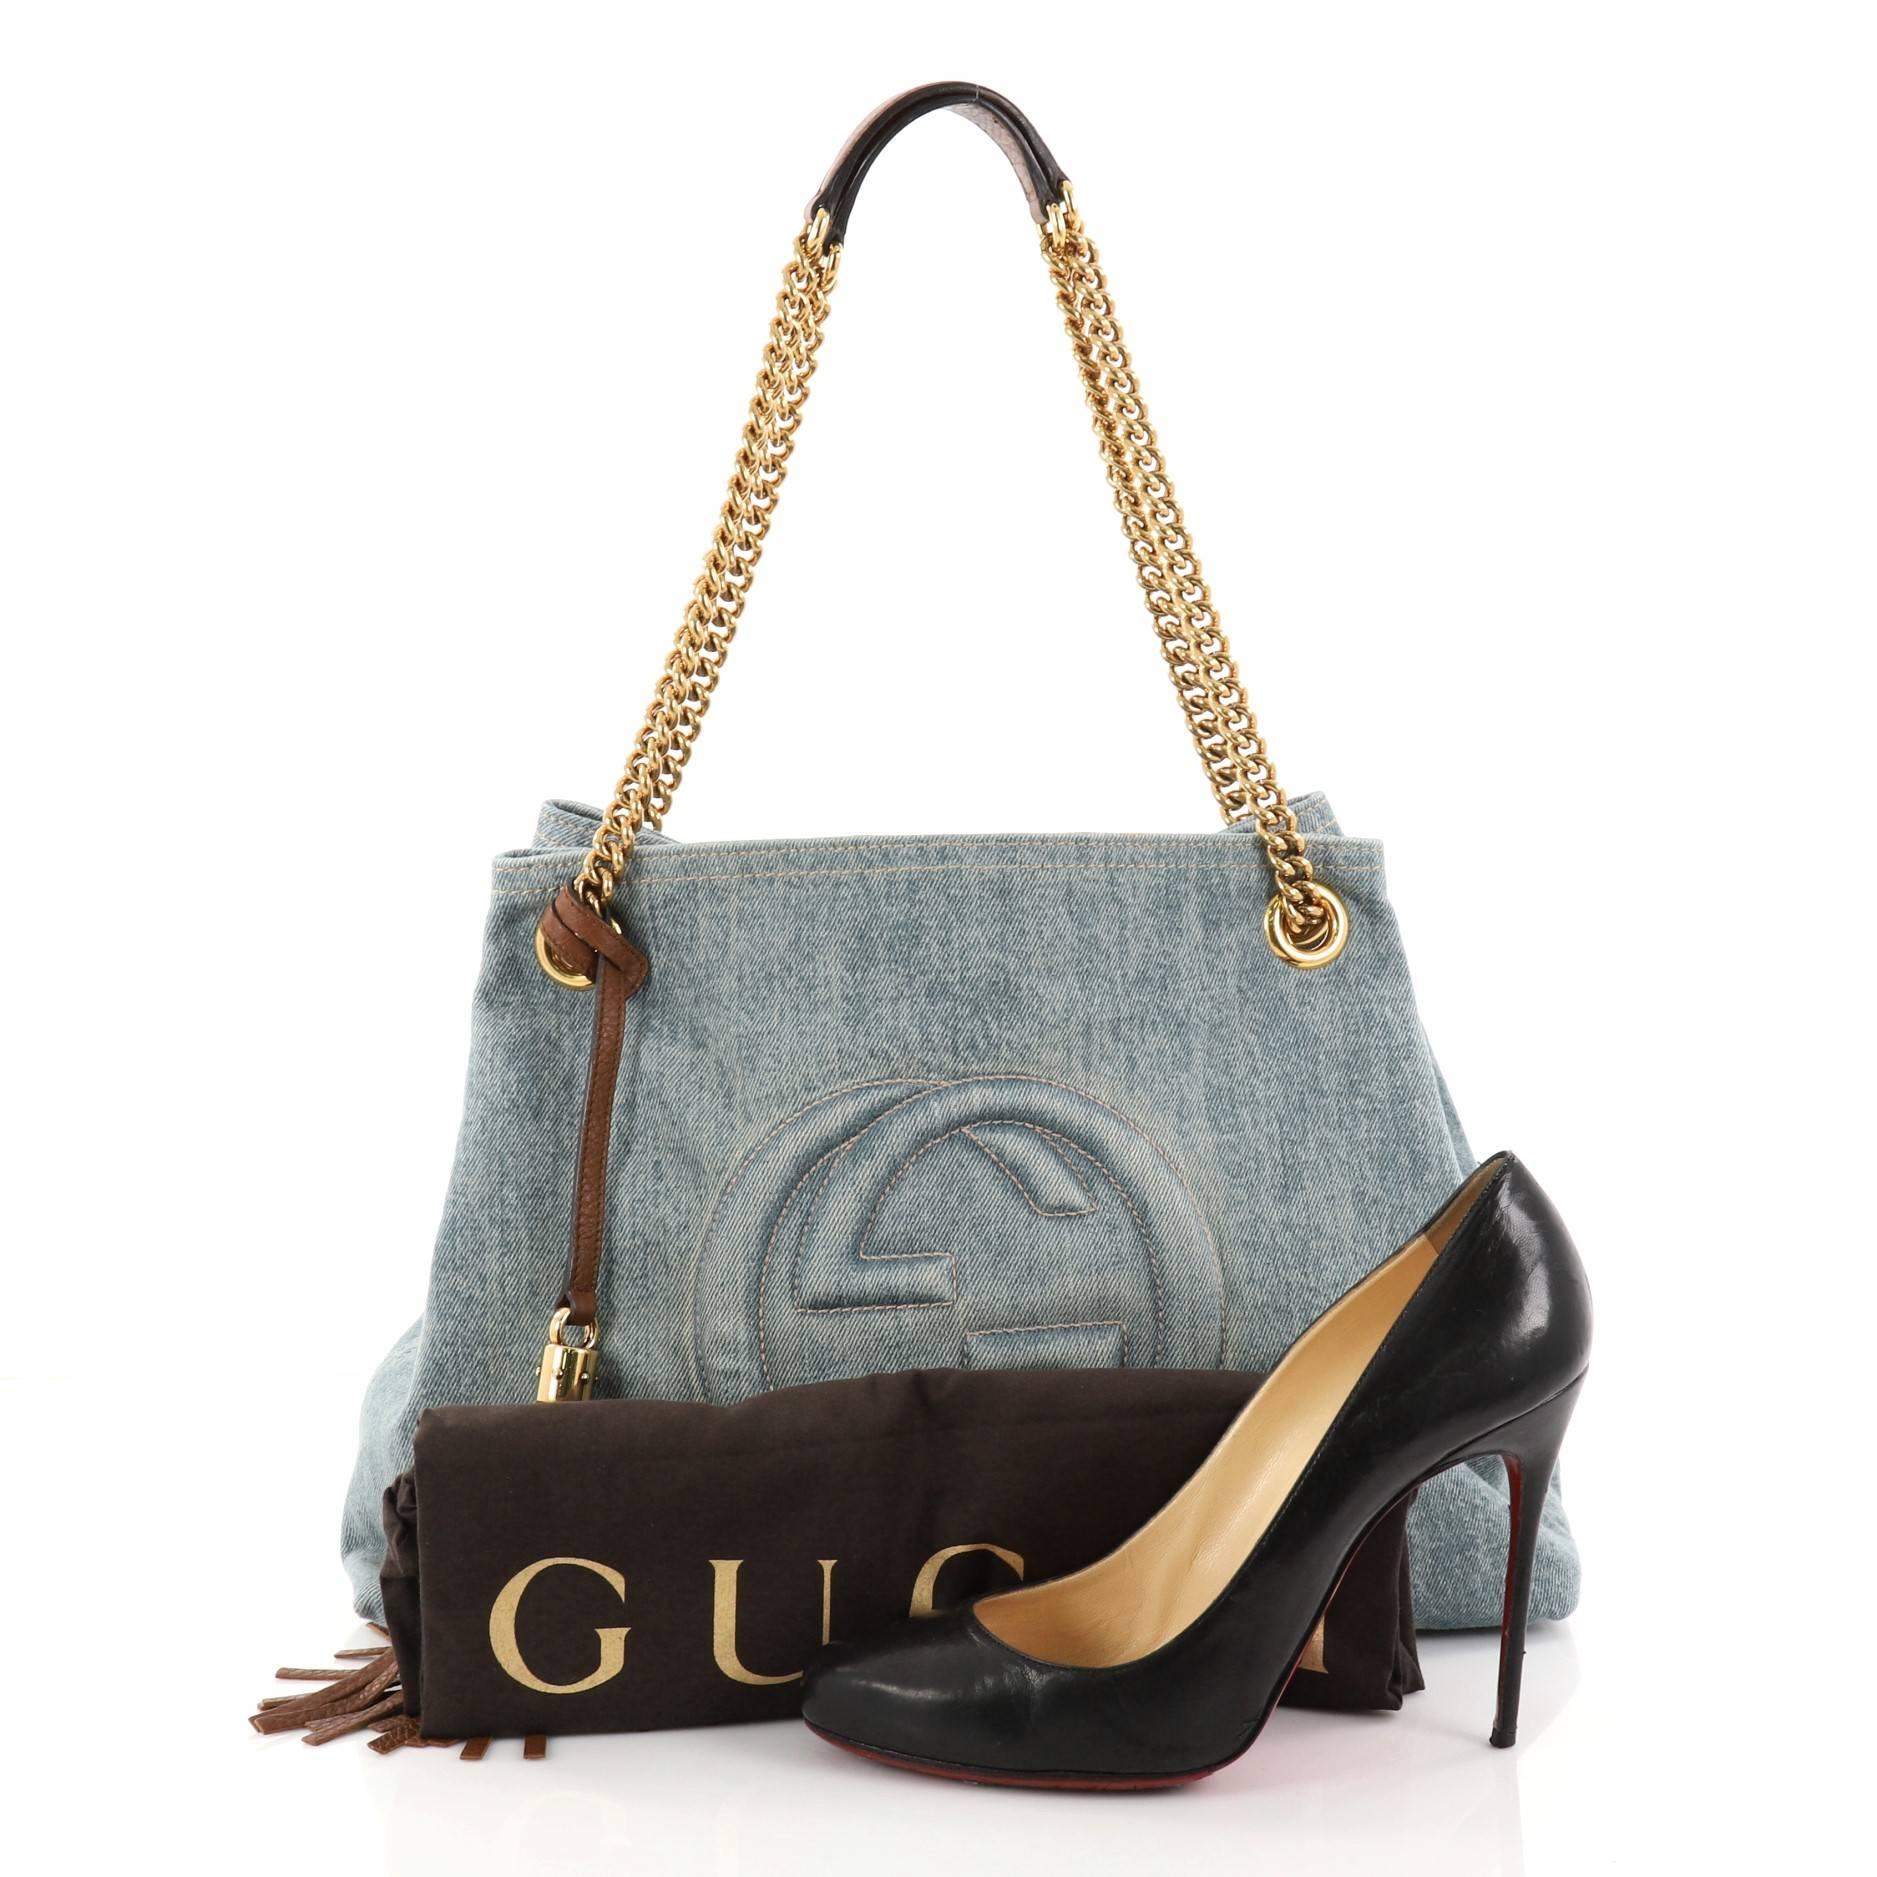 This authentic Gucci Soho Chain Strap Shoulder Bag Denim Medium is simple yet stylish in design. Crafted from light blue denim, this bag features chain strap with leather pads, signature interlocking Gucci logo stitched in front, and gold-tone